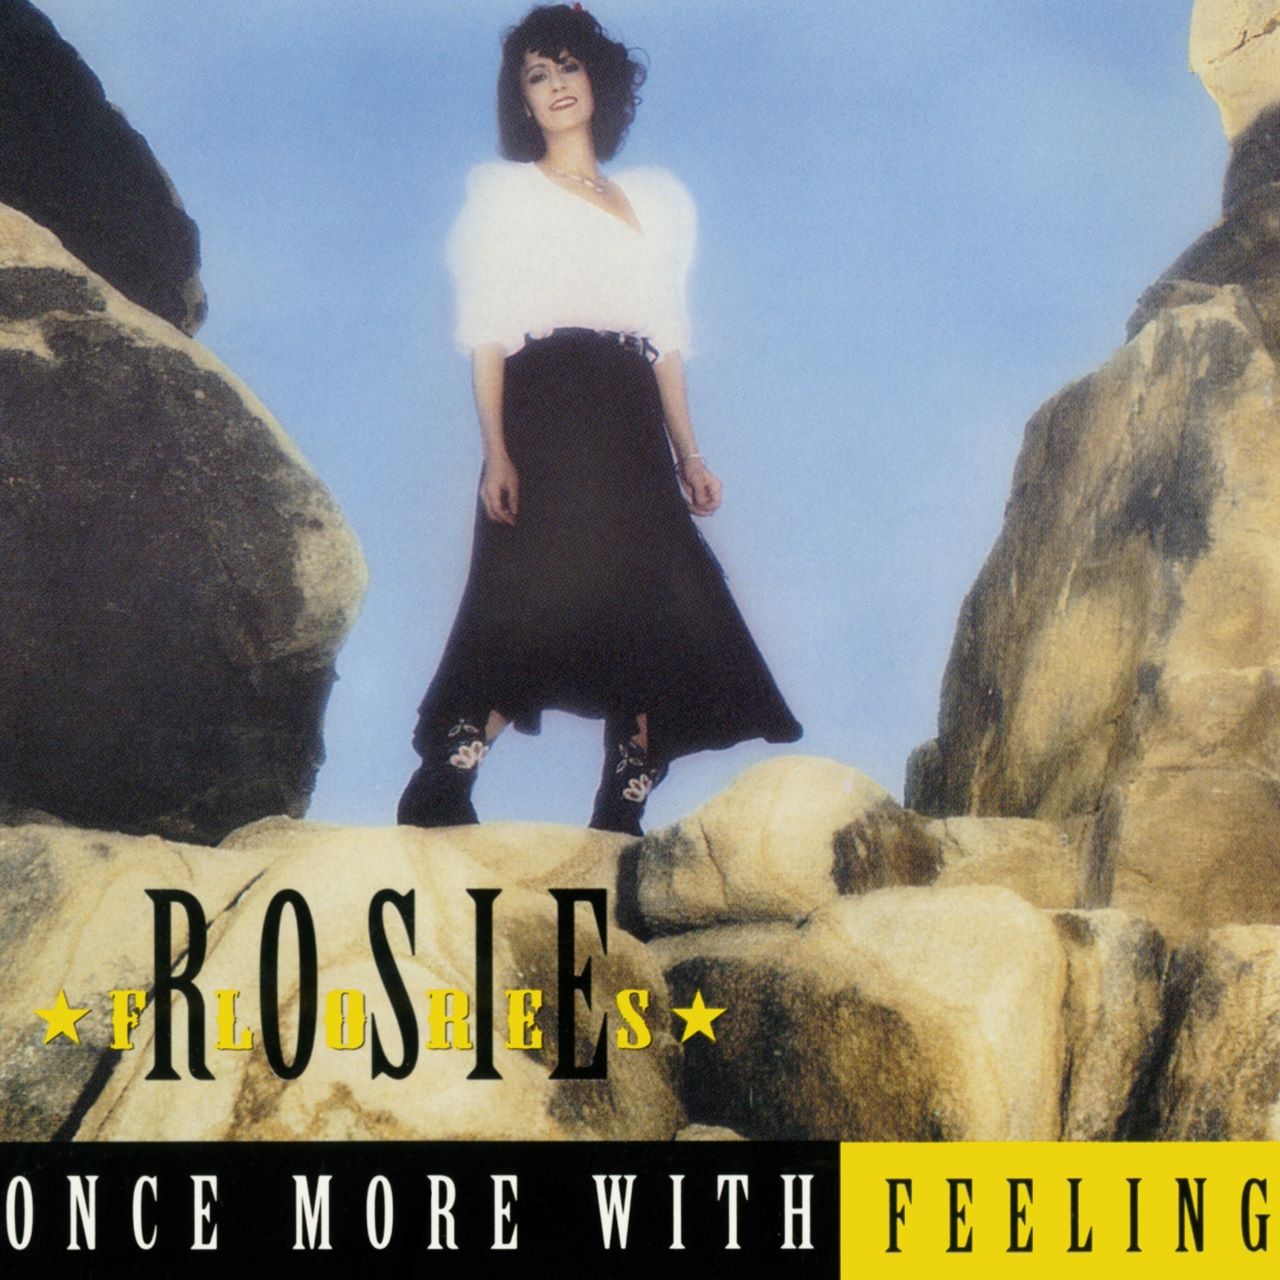 Rosie Flores - Once More With Feeling cover album